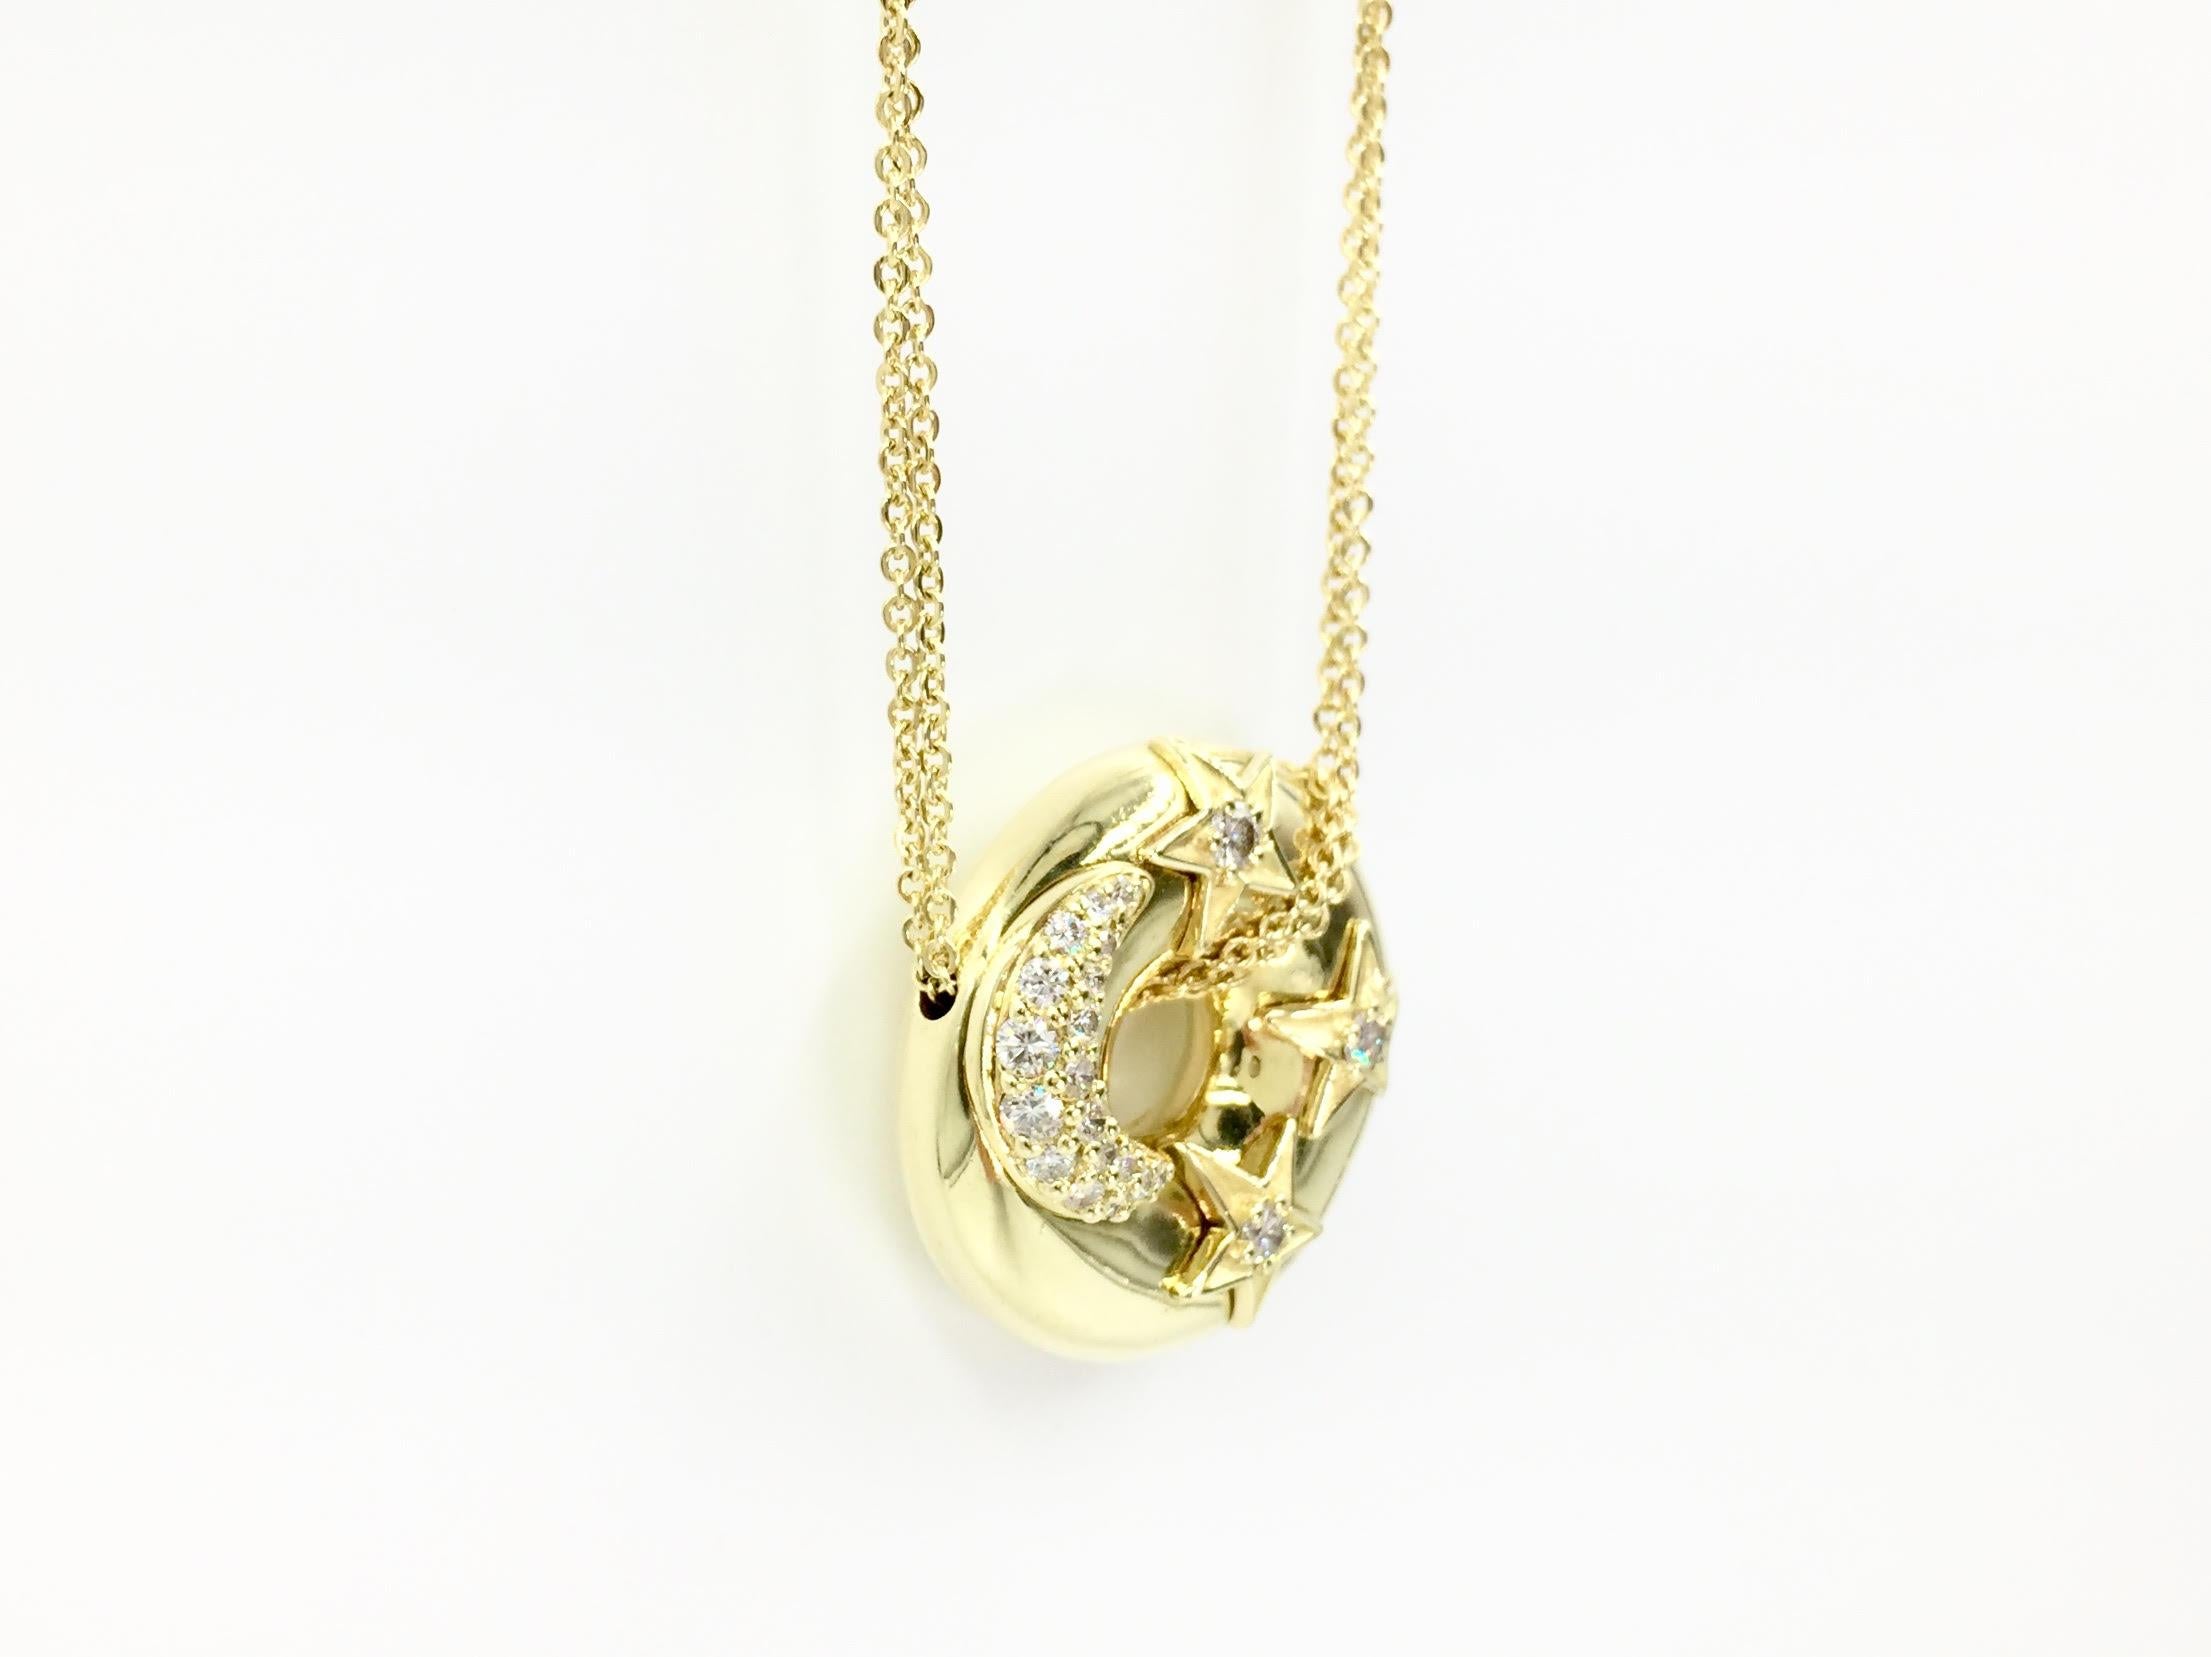 Diamond Celestial 18 Karat Gold Pendant Necklace In Good Condition For Sale In Pikesville, MD